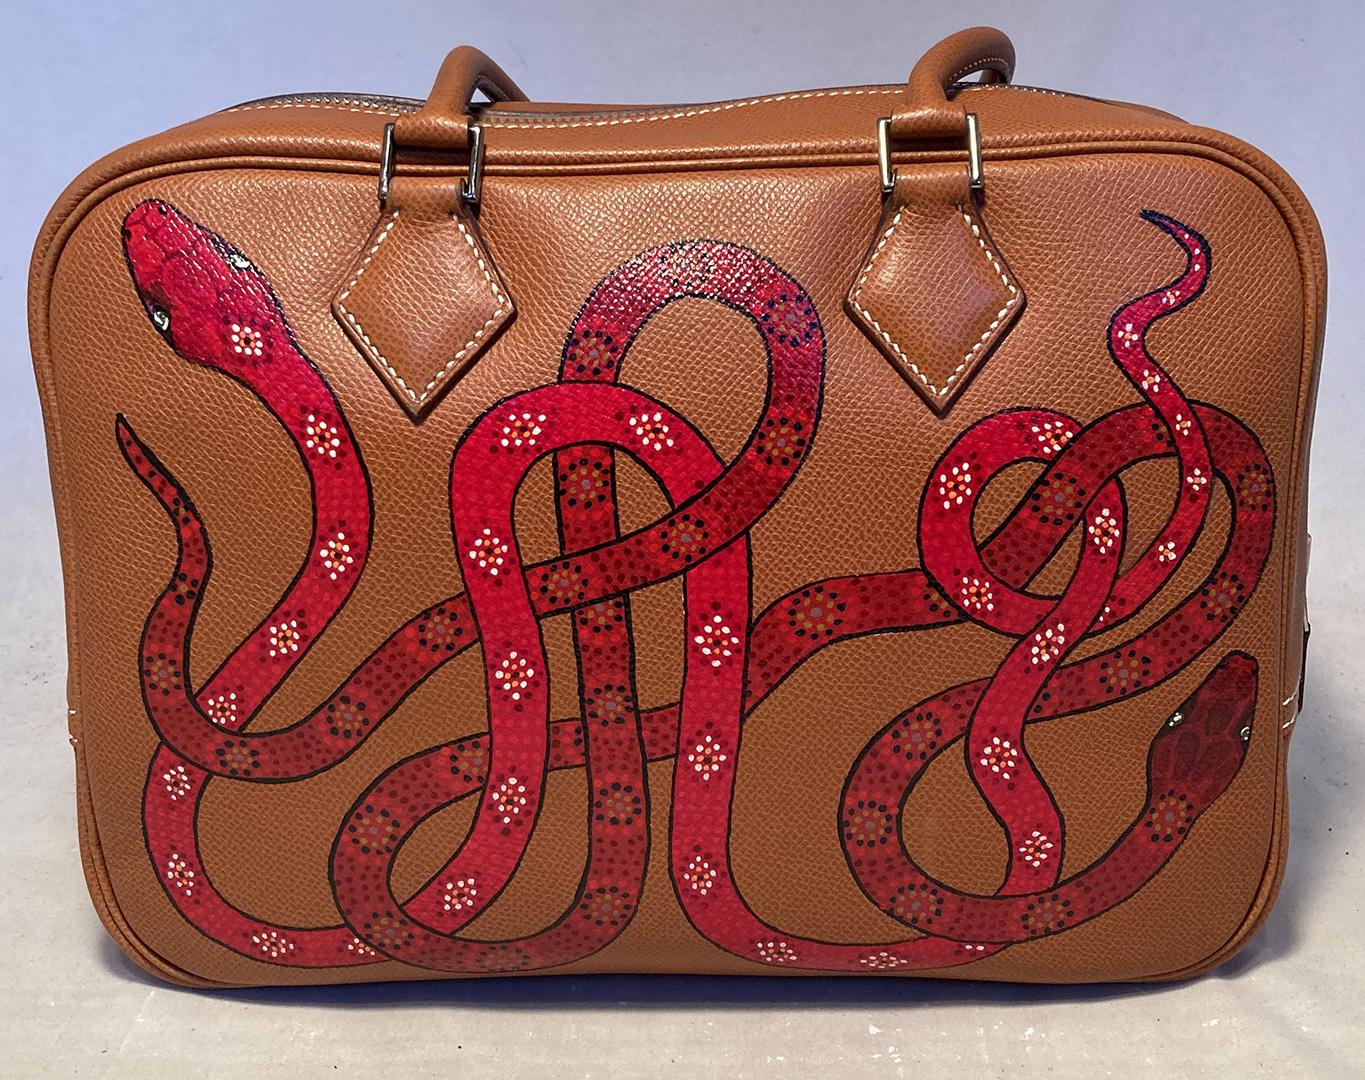 Hermes Hand Painted Snakes Plume 28 in excellent condition. Tan veau graine leather plume 28 trimmed with silver hardware, cream topstitching, and hand painted snakes throughout the exterior. 3 snakes along the front and 2 on the back in various